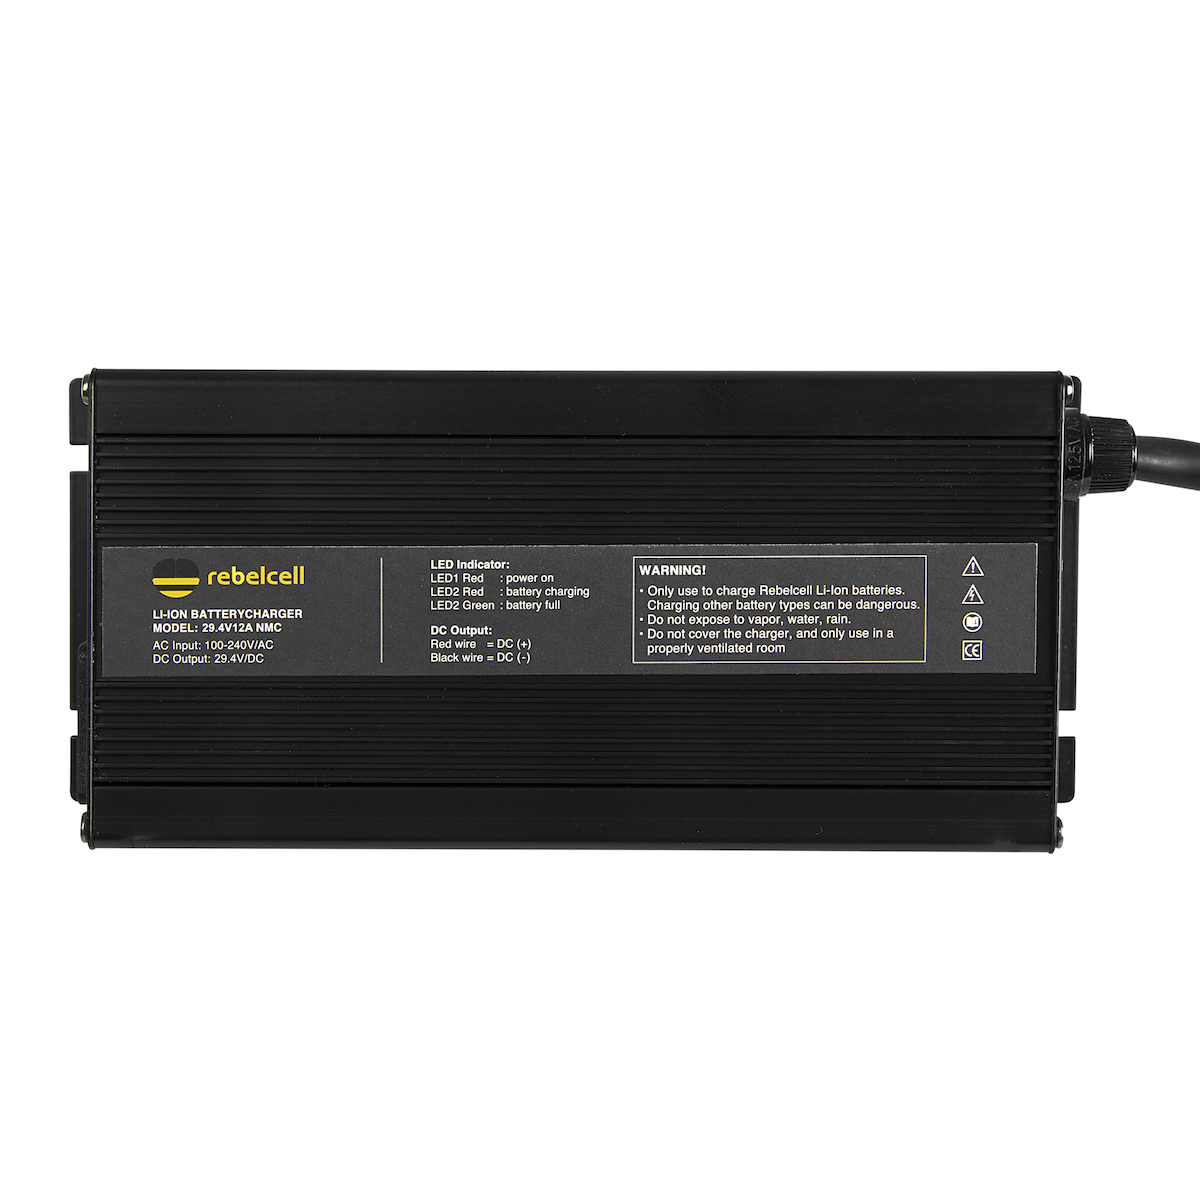 Rebelcell charger 29.4V12A product image